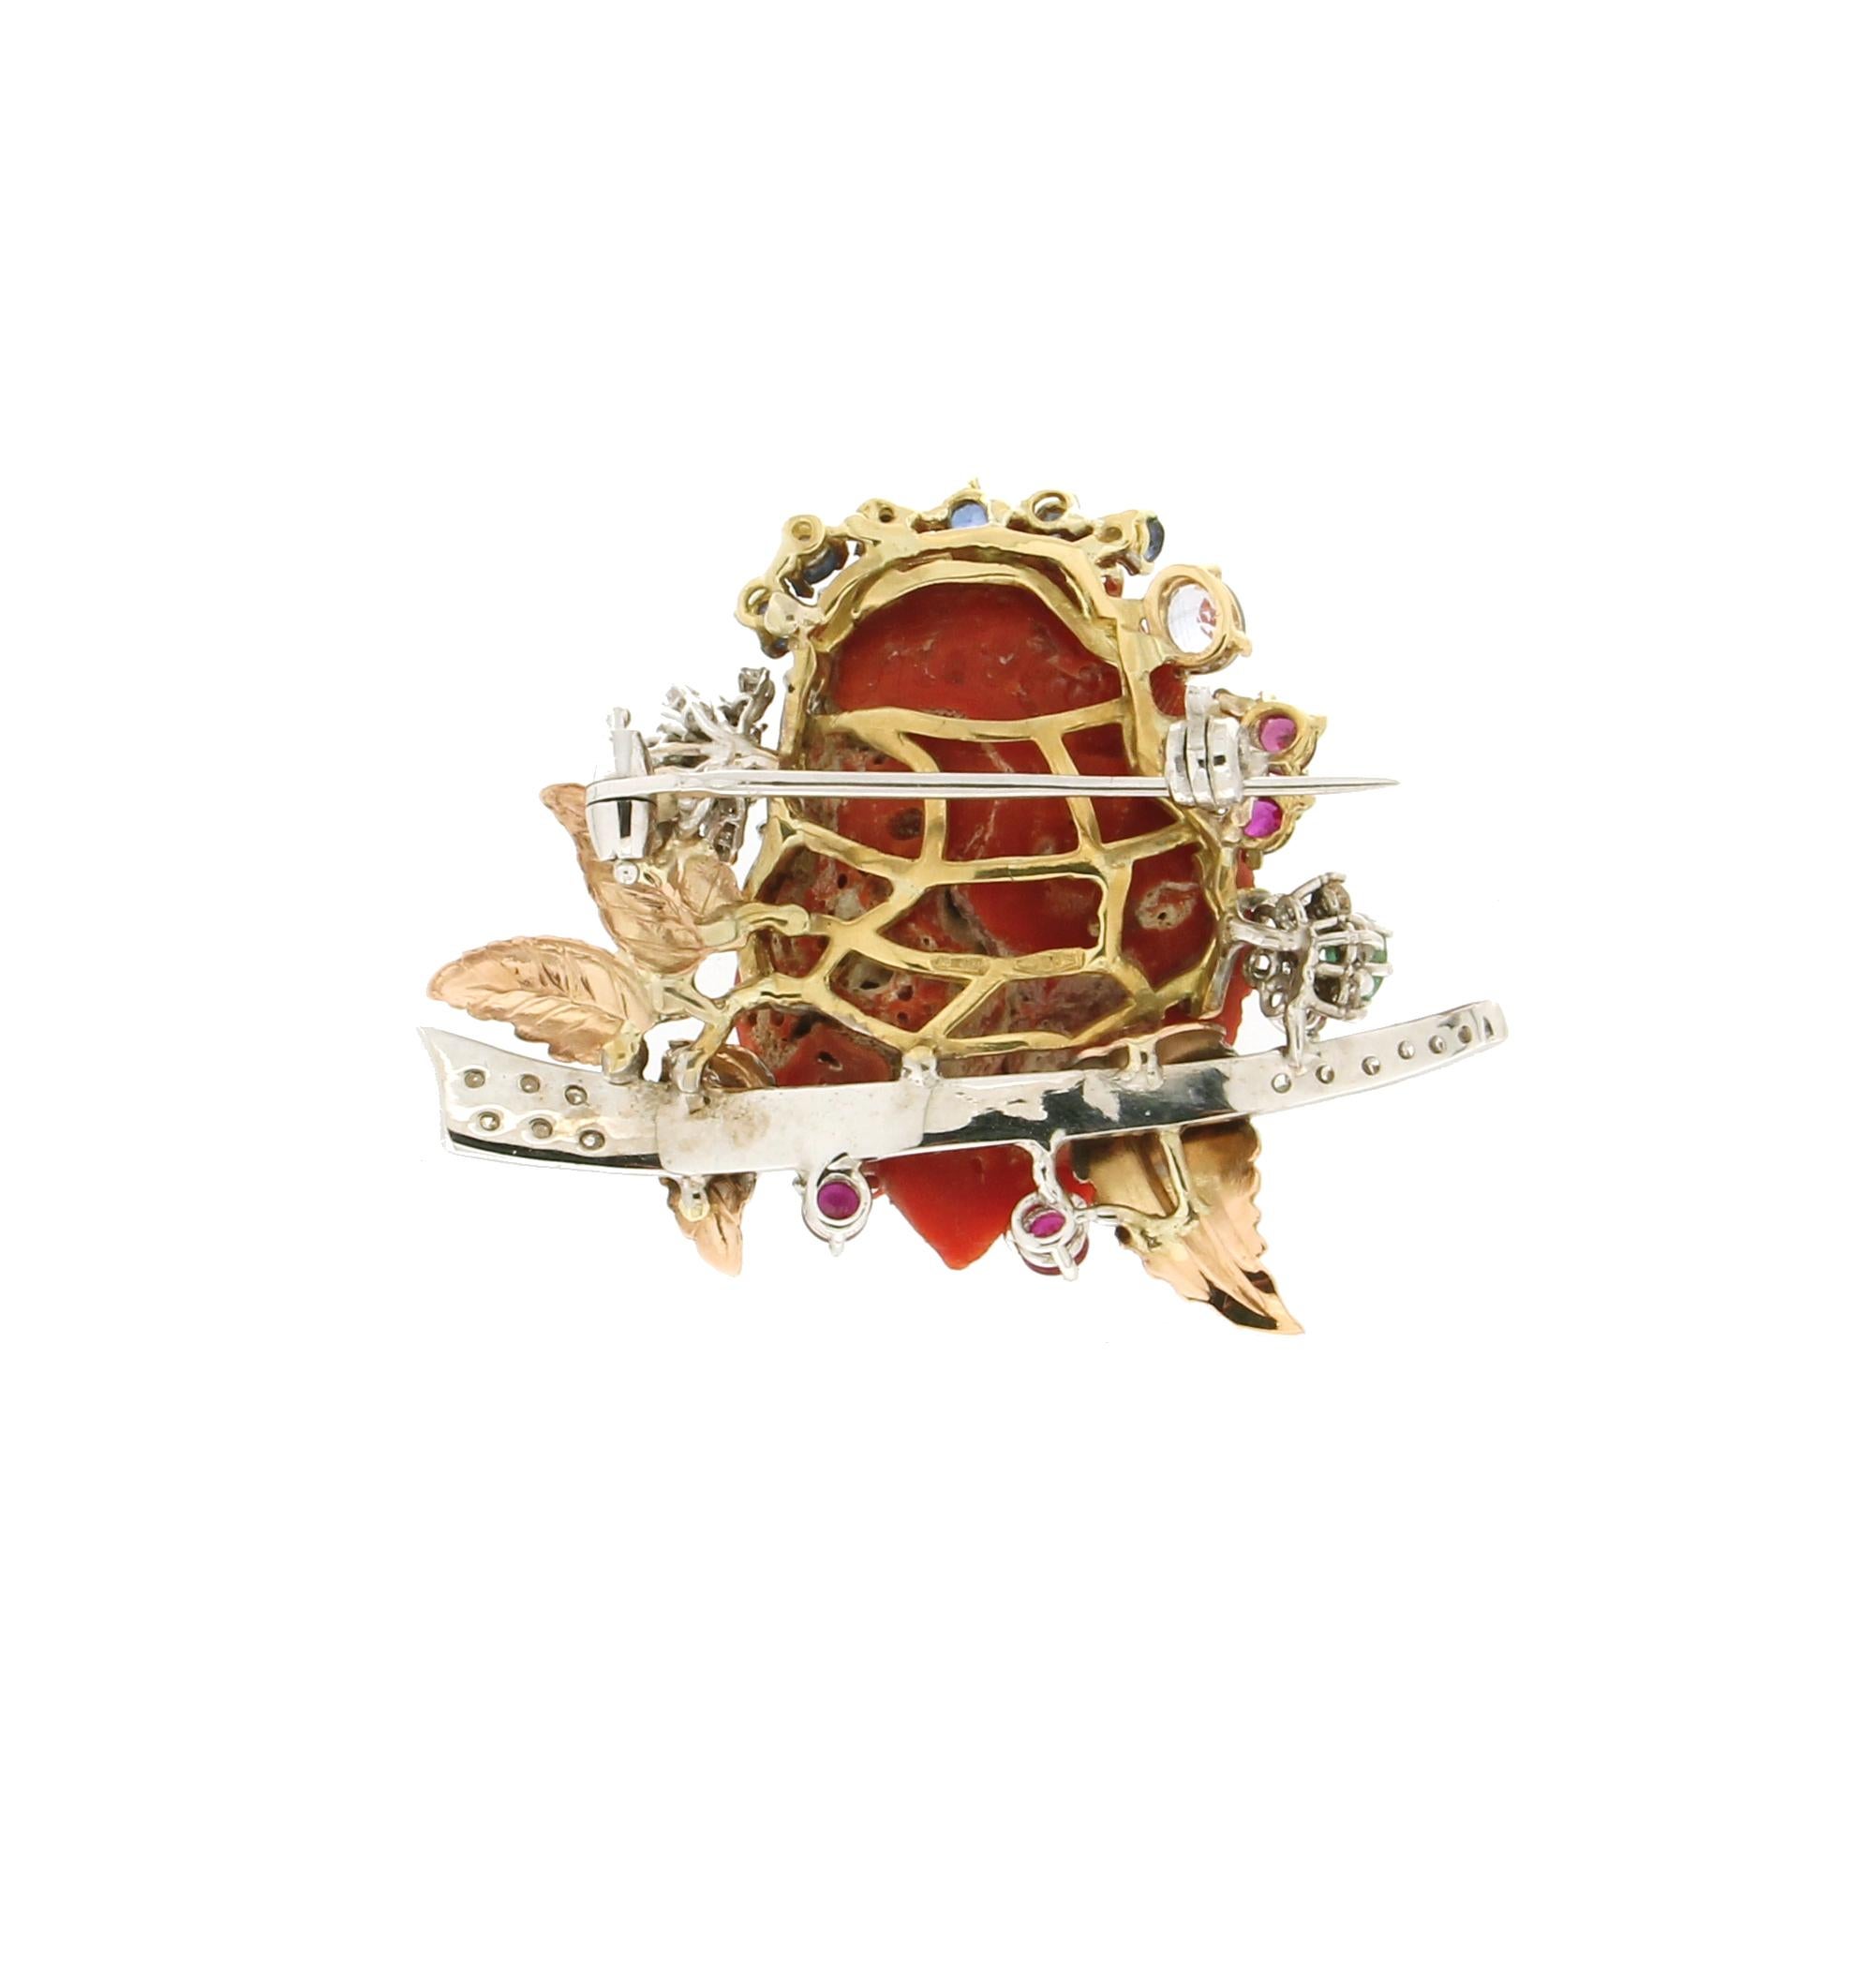 Brilliant Cut Handcraft Owl 18 Karat Yellow and White Gold Diamonds Coral Sapphires Brooch For Sale